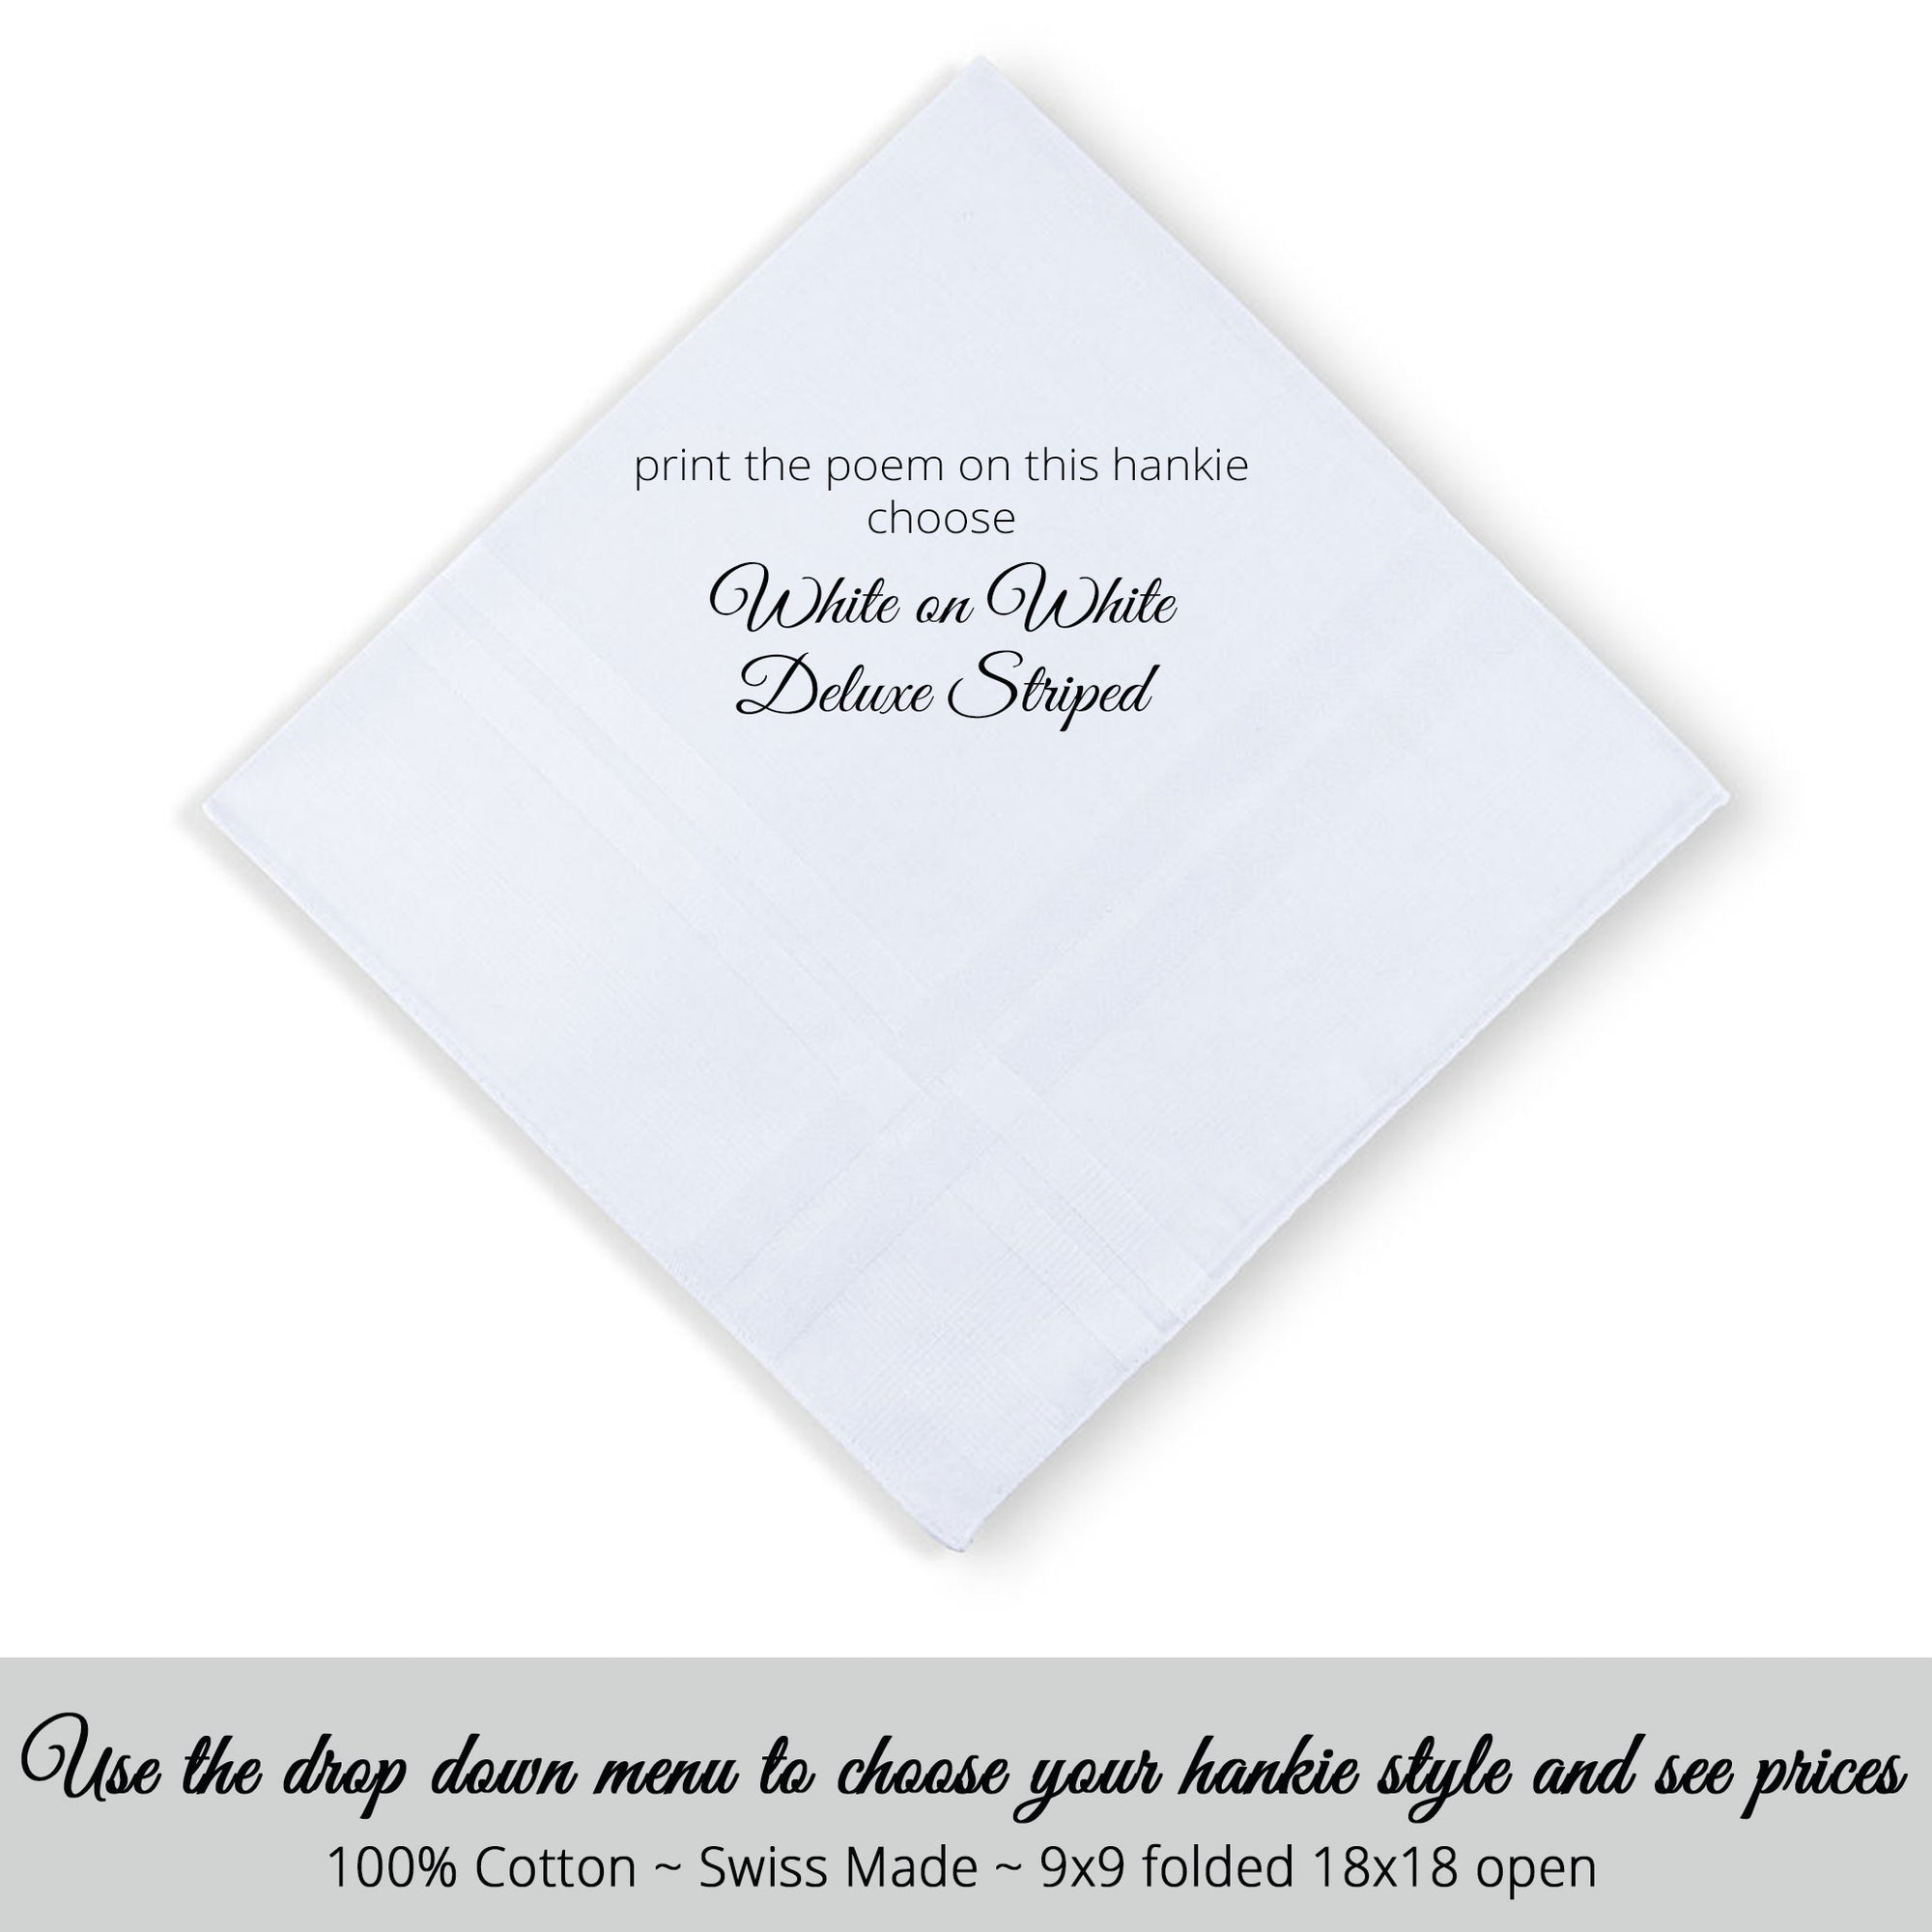 Gay Wedding Masculine Hankie style Swiss made white on white deluxe striped for the Maid of Honor poem printed hankie